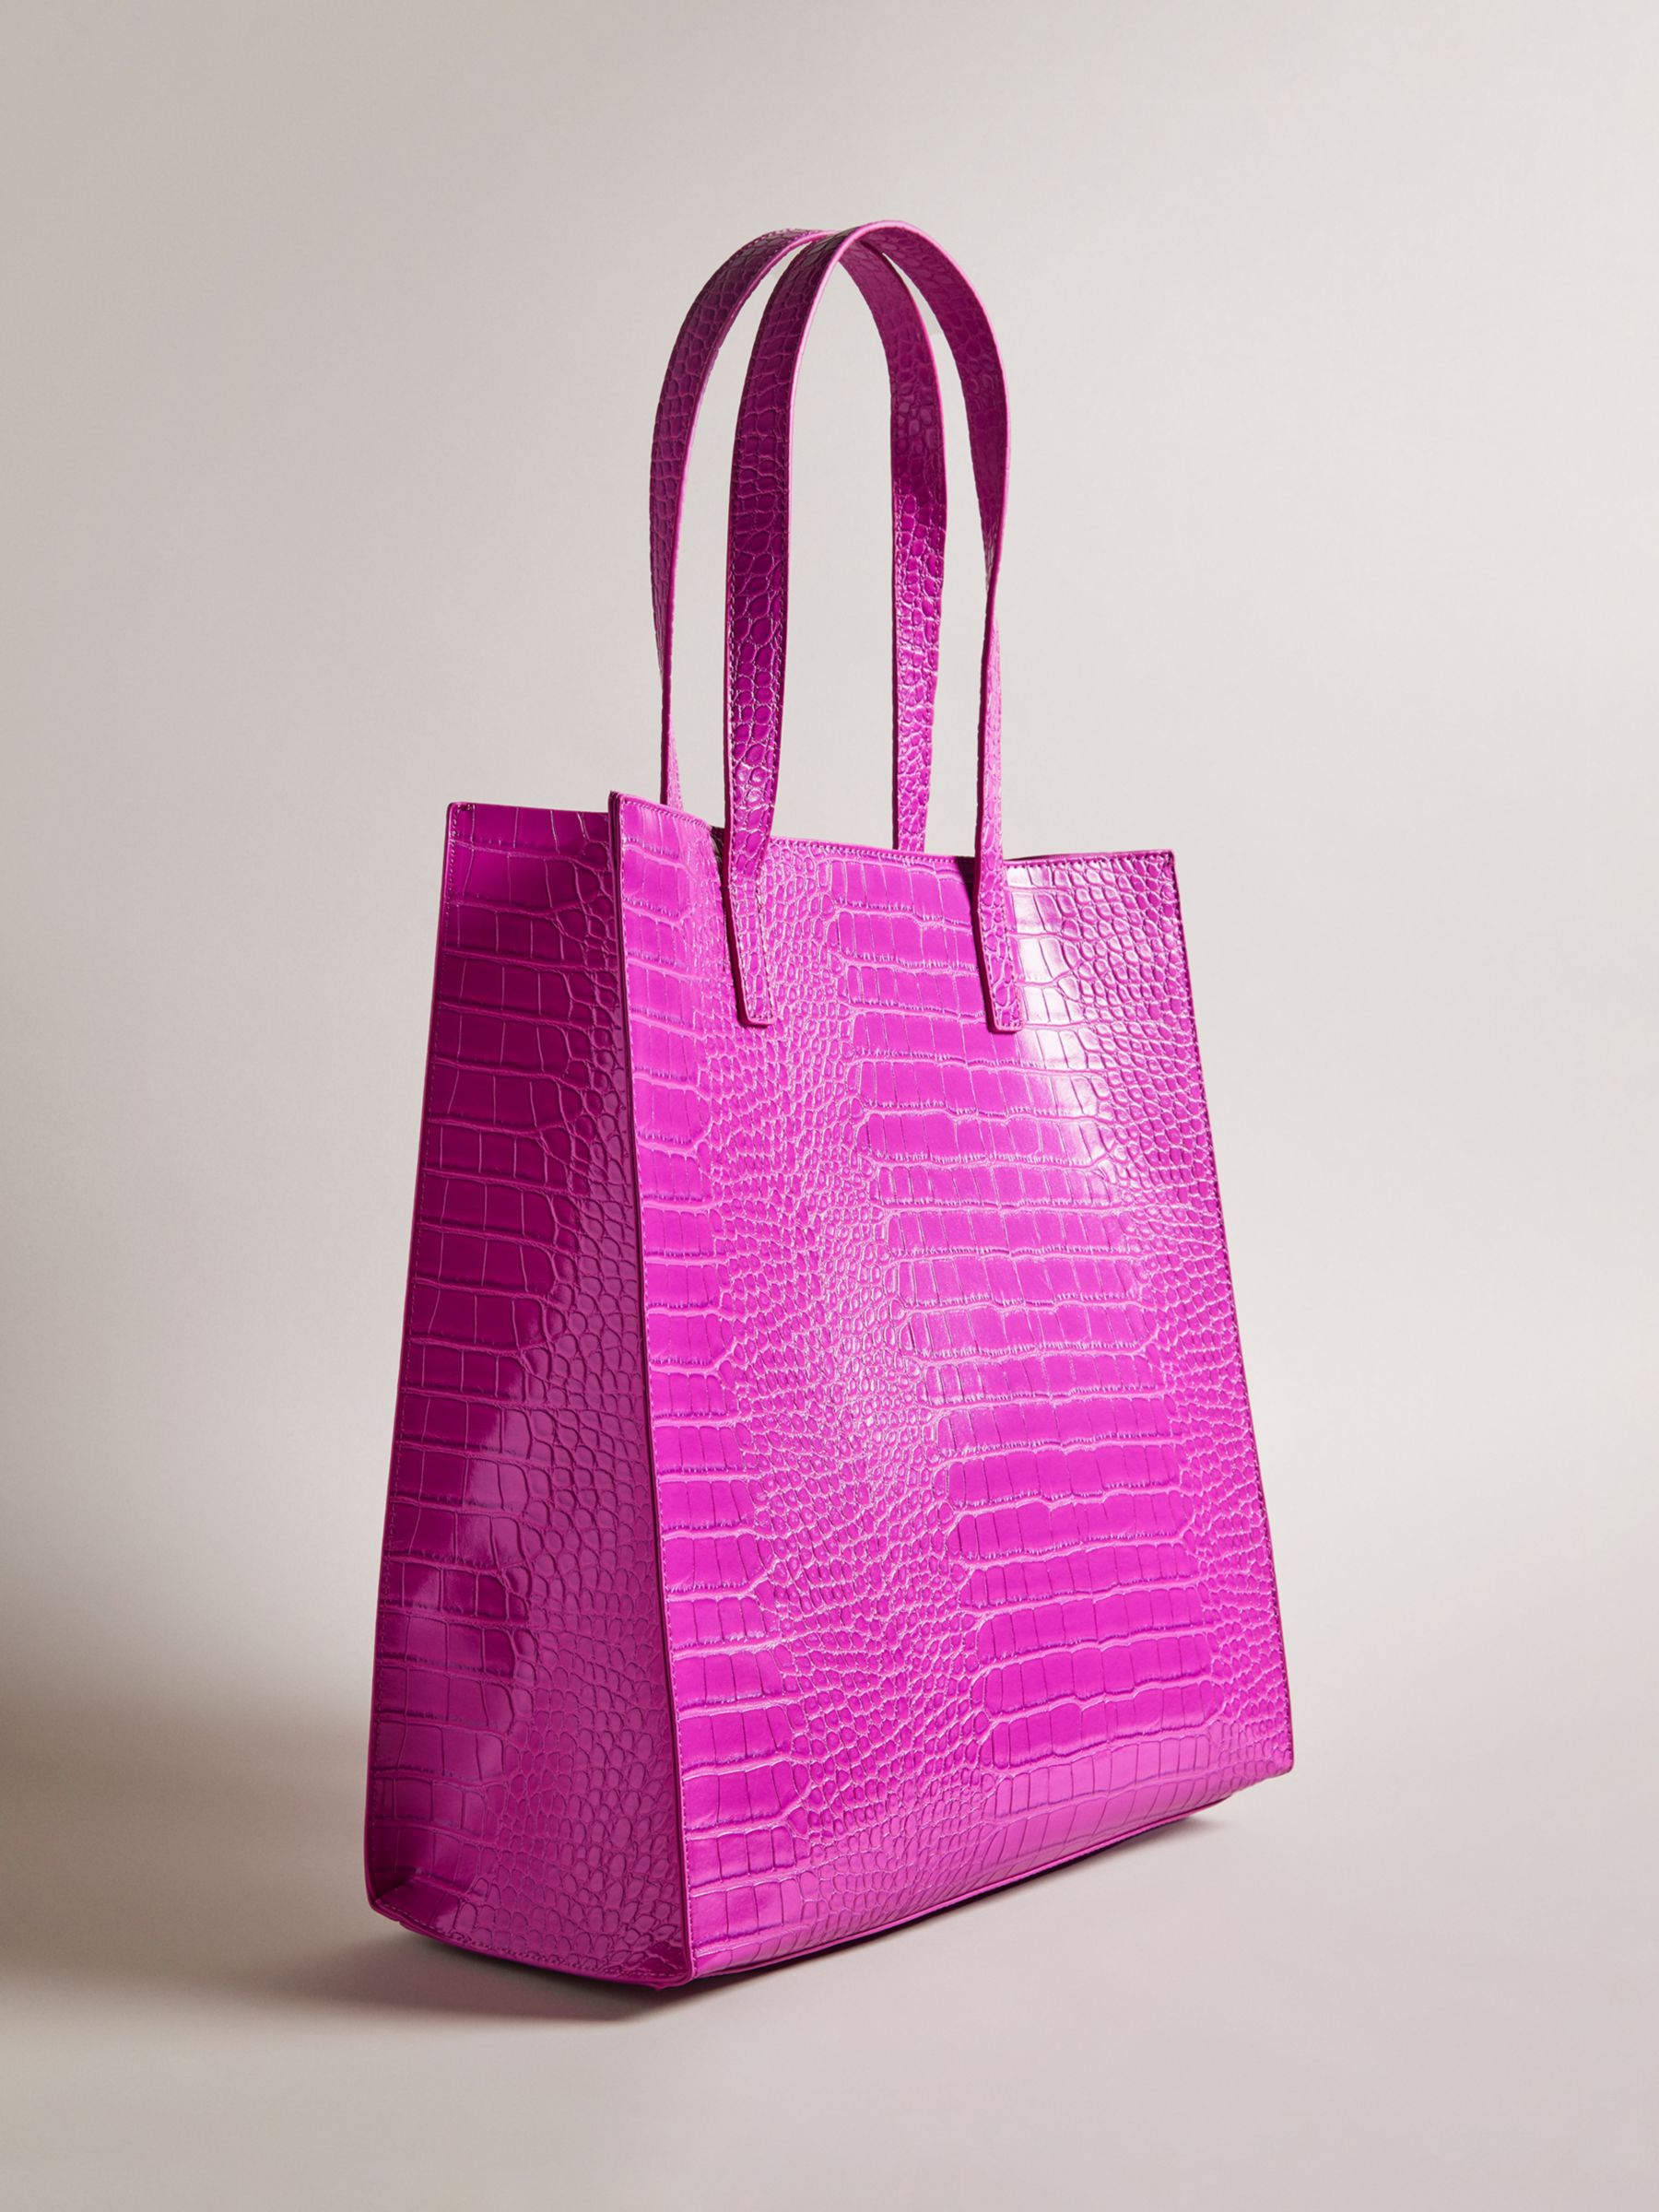 Ted Baker Croccon Large Icon Shopper Bag, Hot Pink at John Lewis & Partners